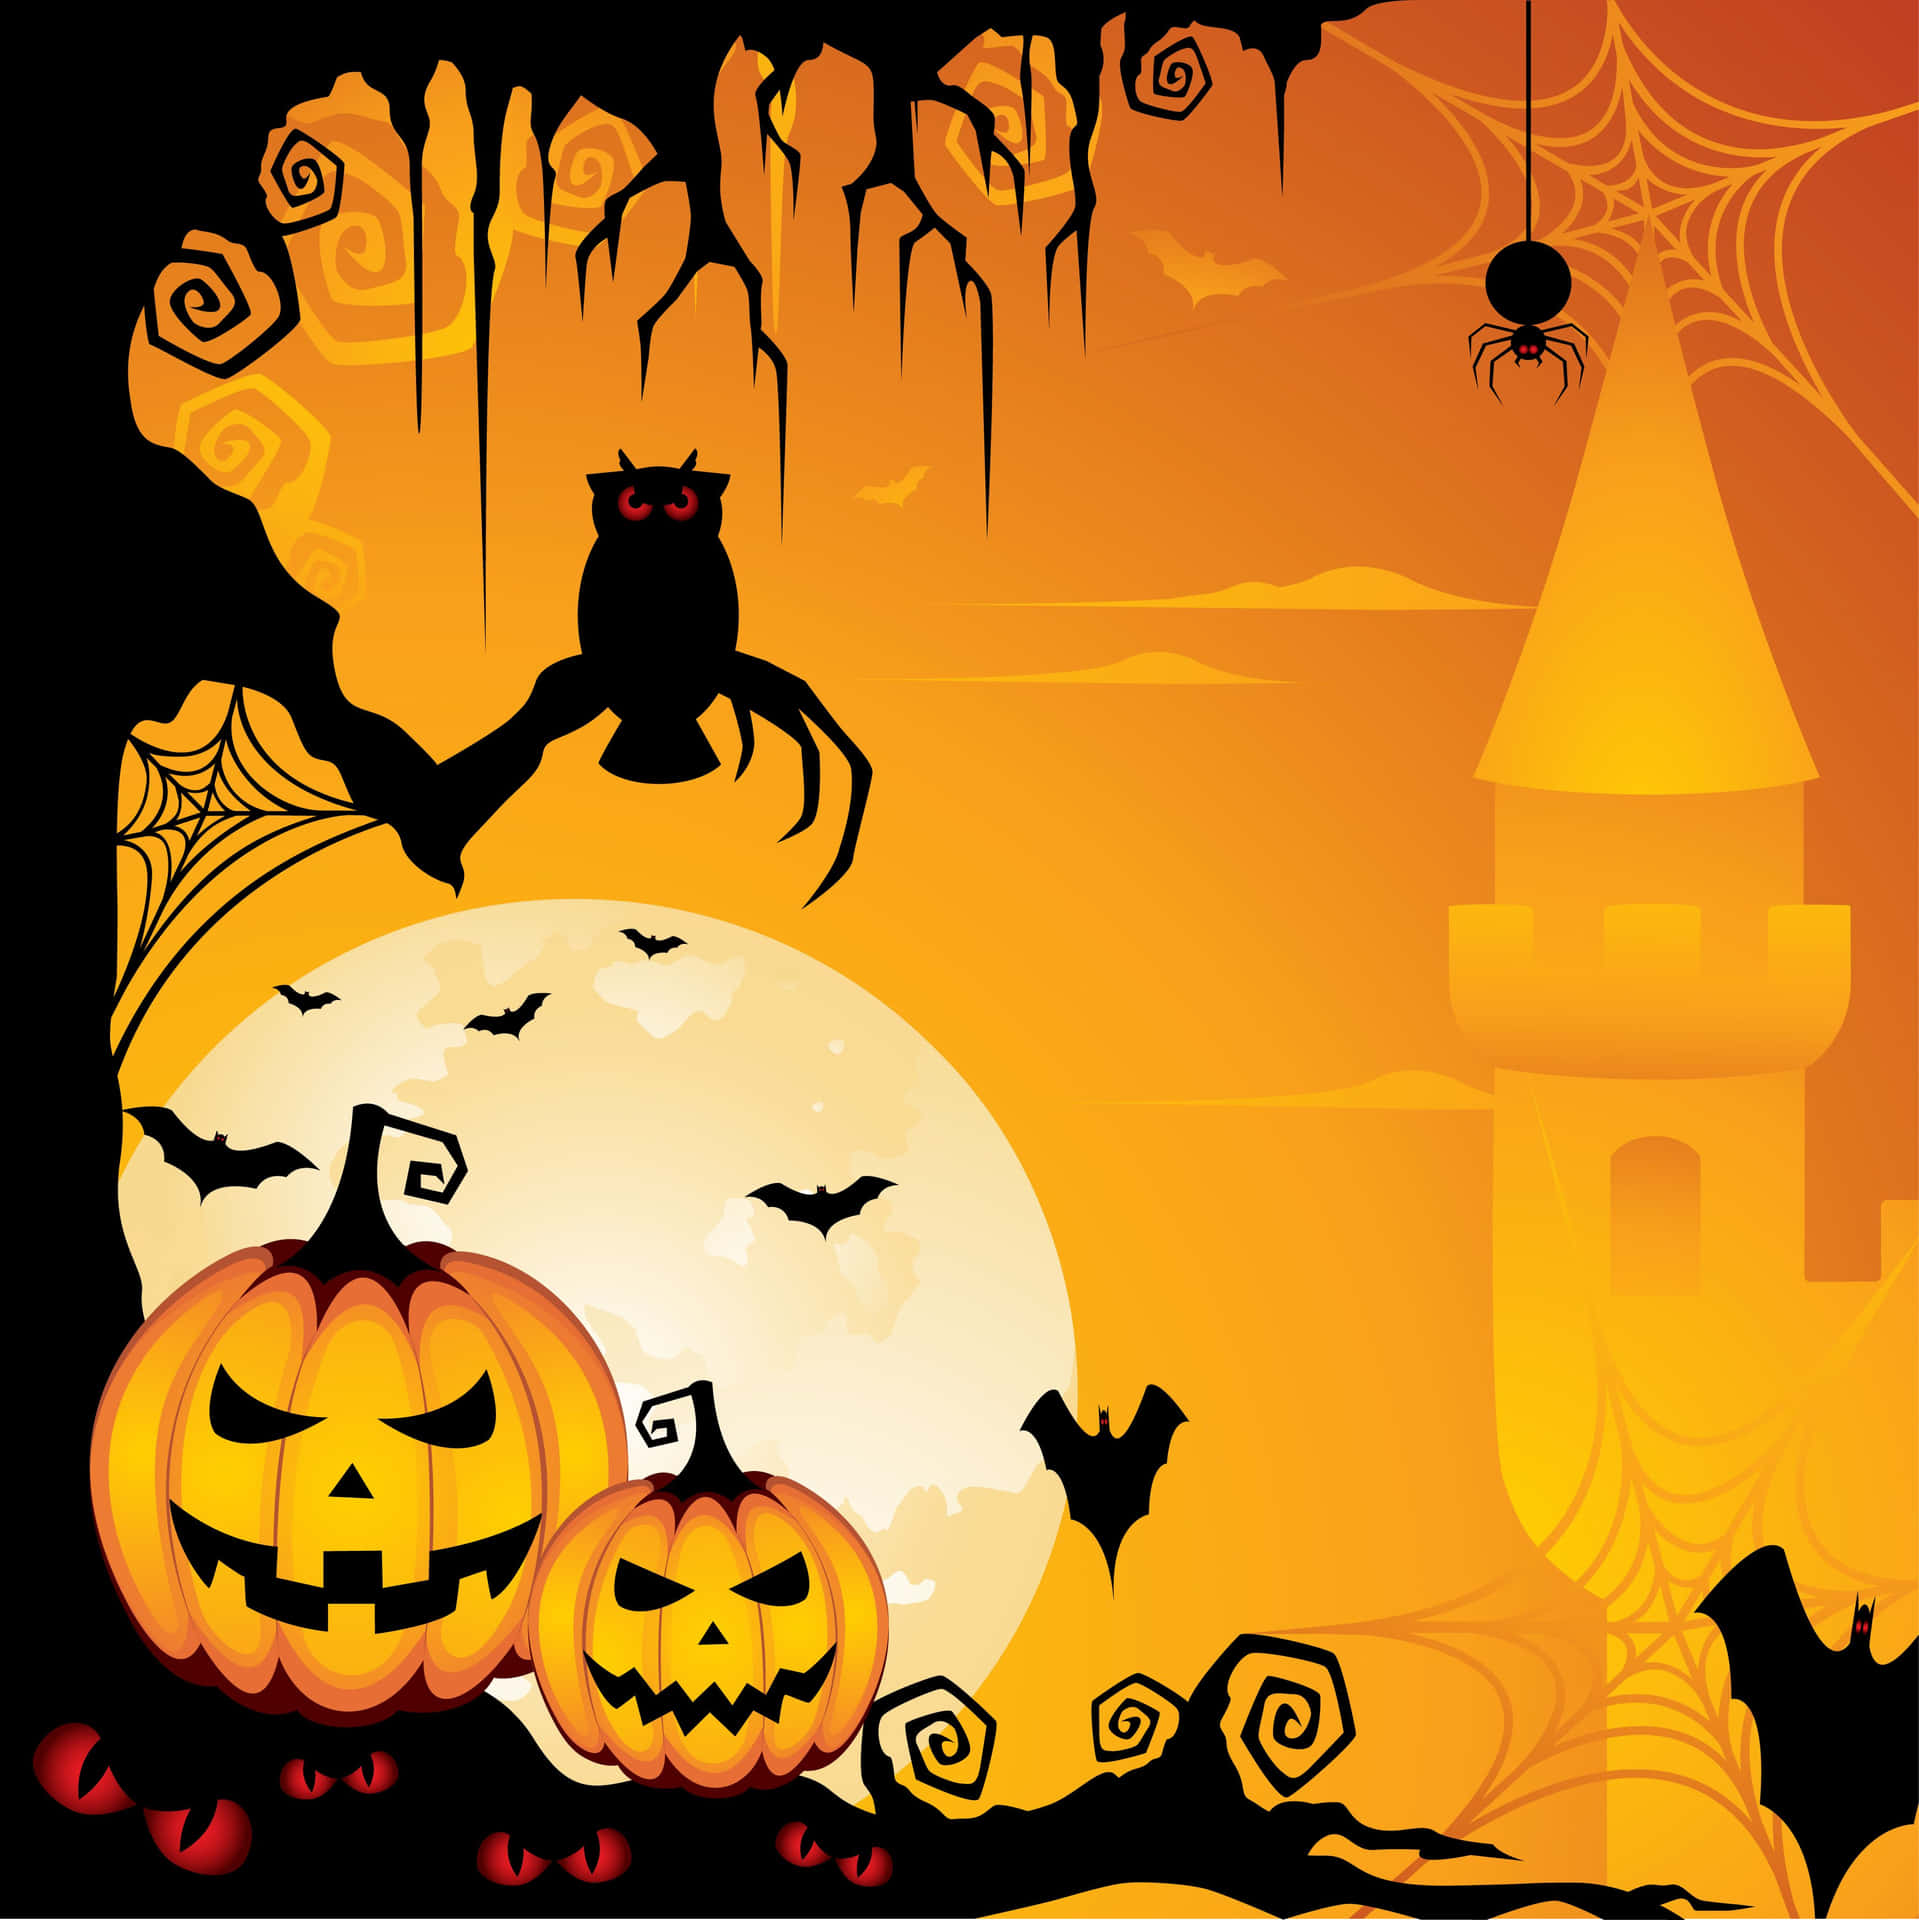 Halloween Background With Pumpkins And A Castle